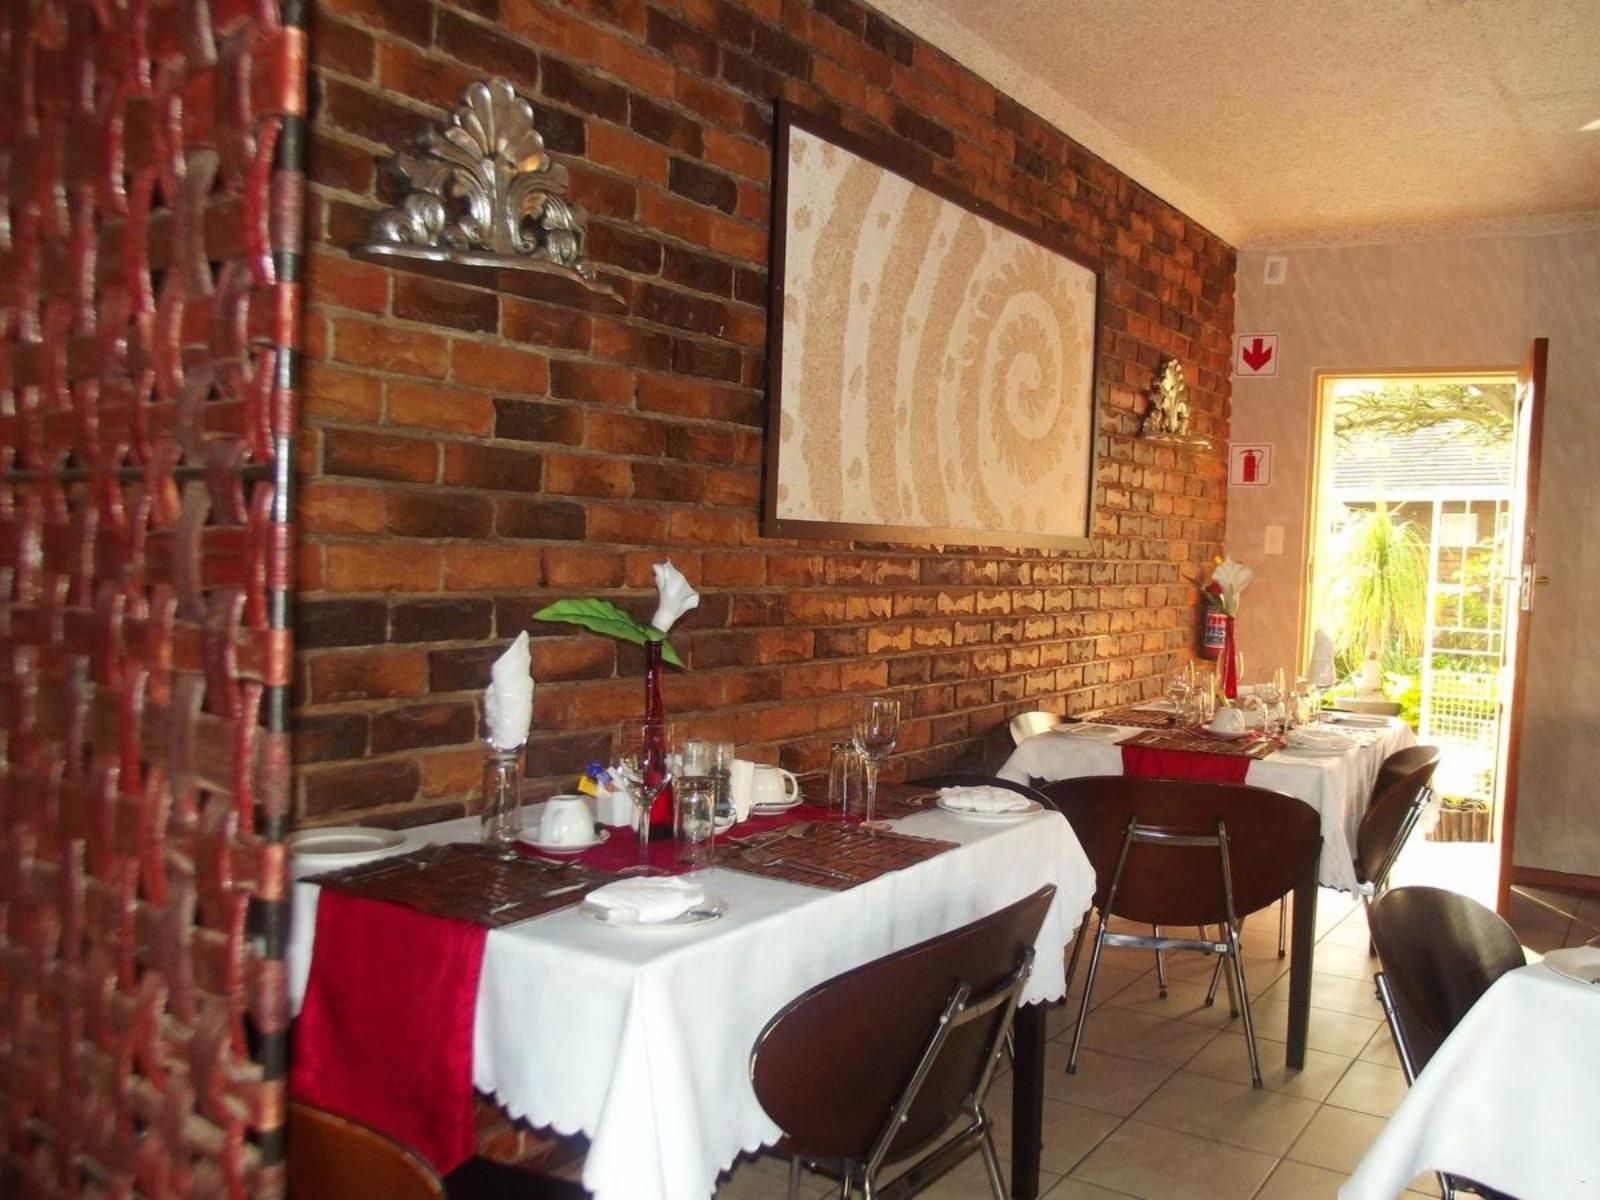 Ledimor Guest House Polokwane Pietersburg Limpopo Province South Africa Place Cover, Food, Restaurant, Bar